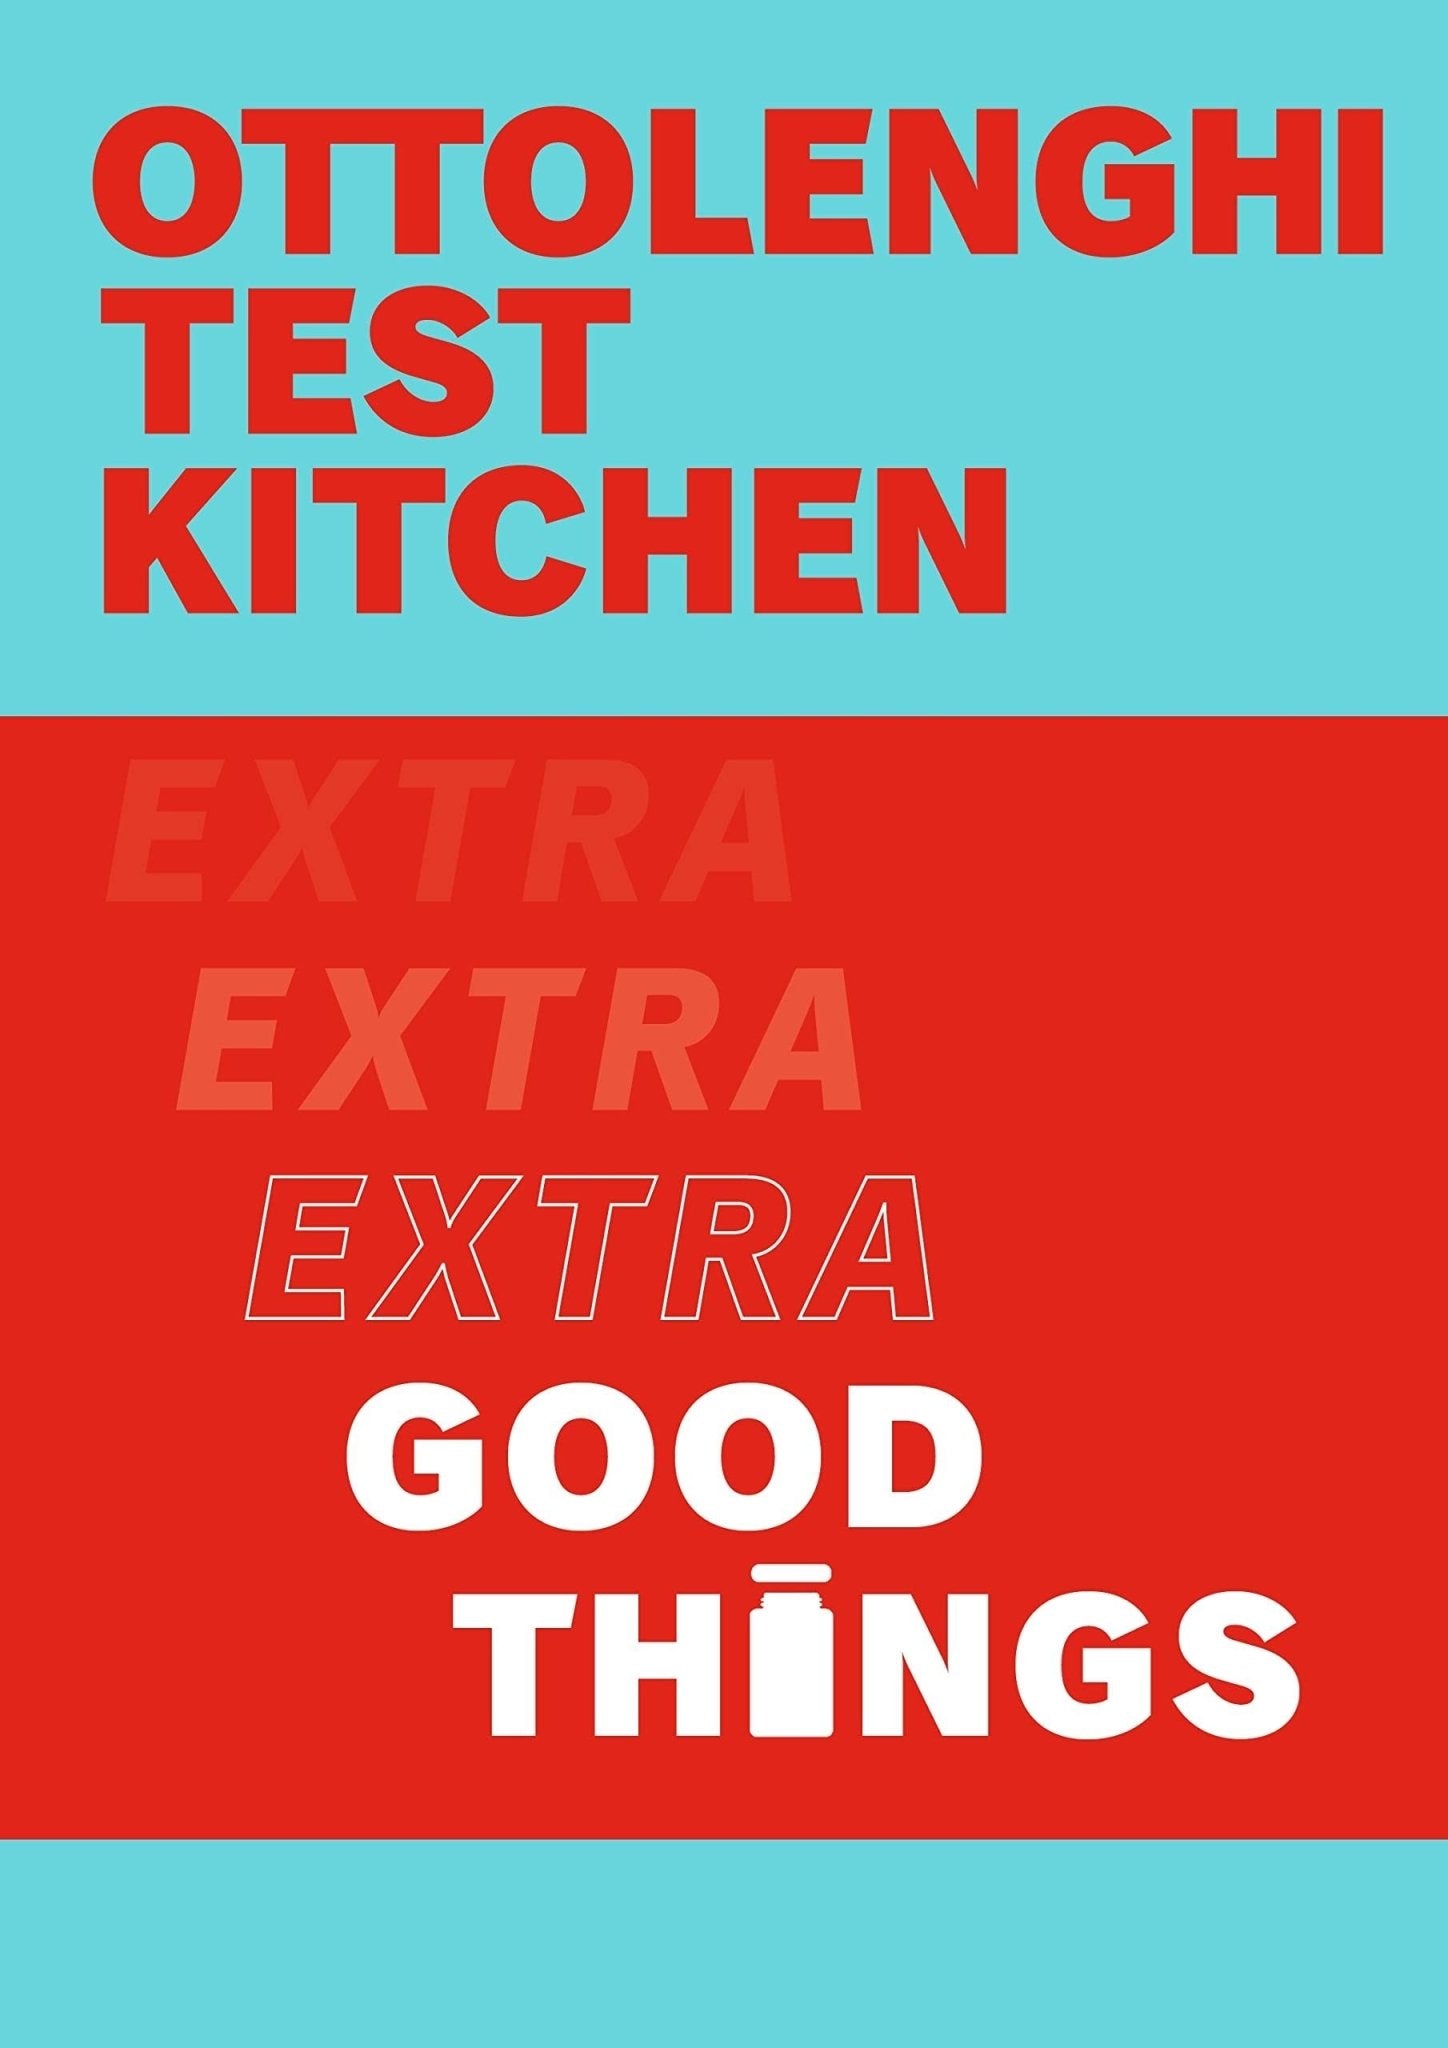 Heliotique | Ottolenghi Test Kitchen: Extra Good Things